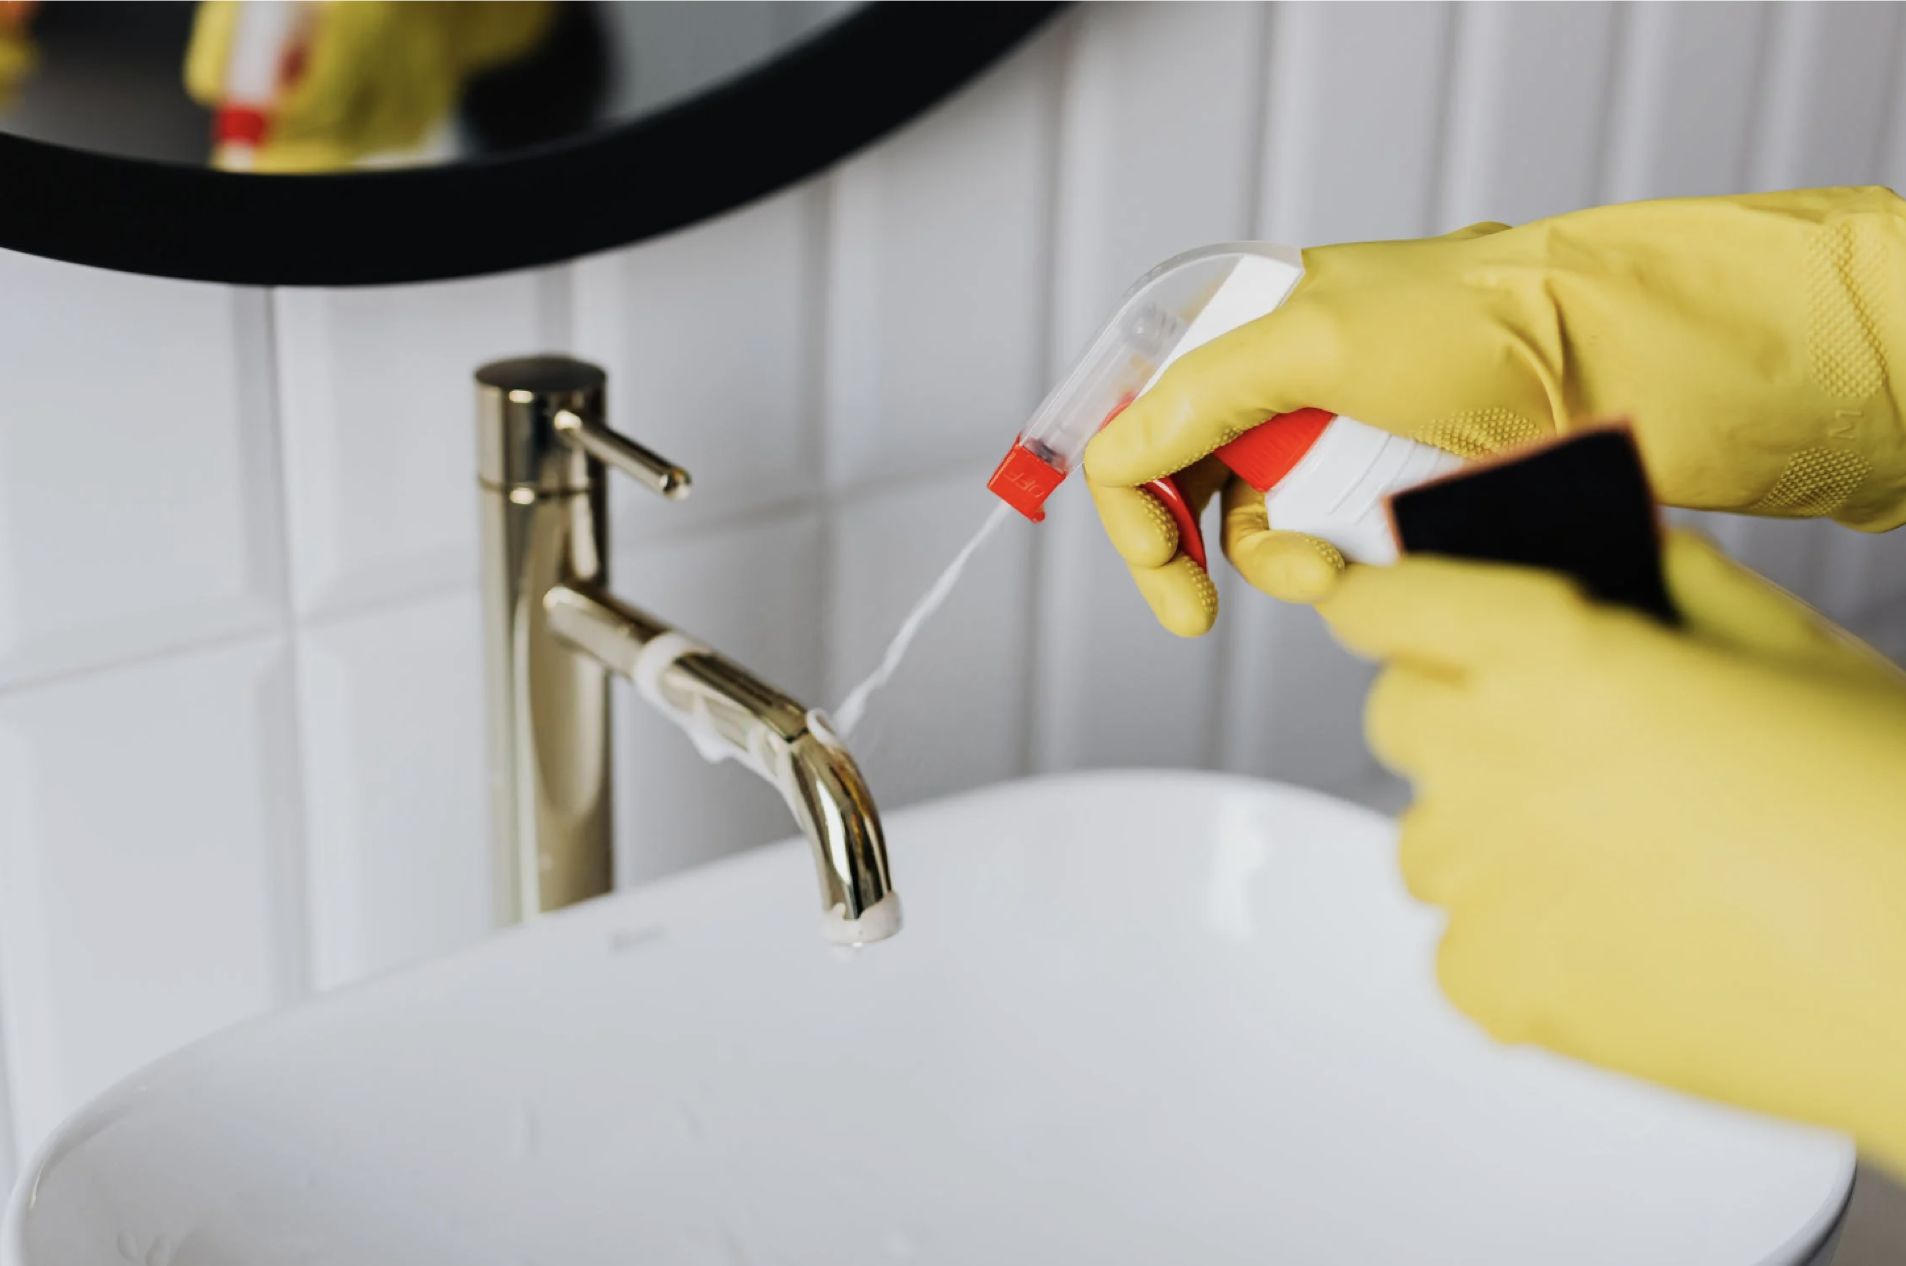 gloved hands spraying cleaner on the spout of a bathroom sink